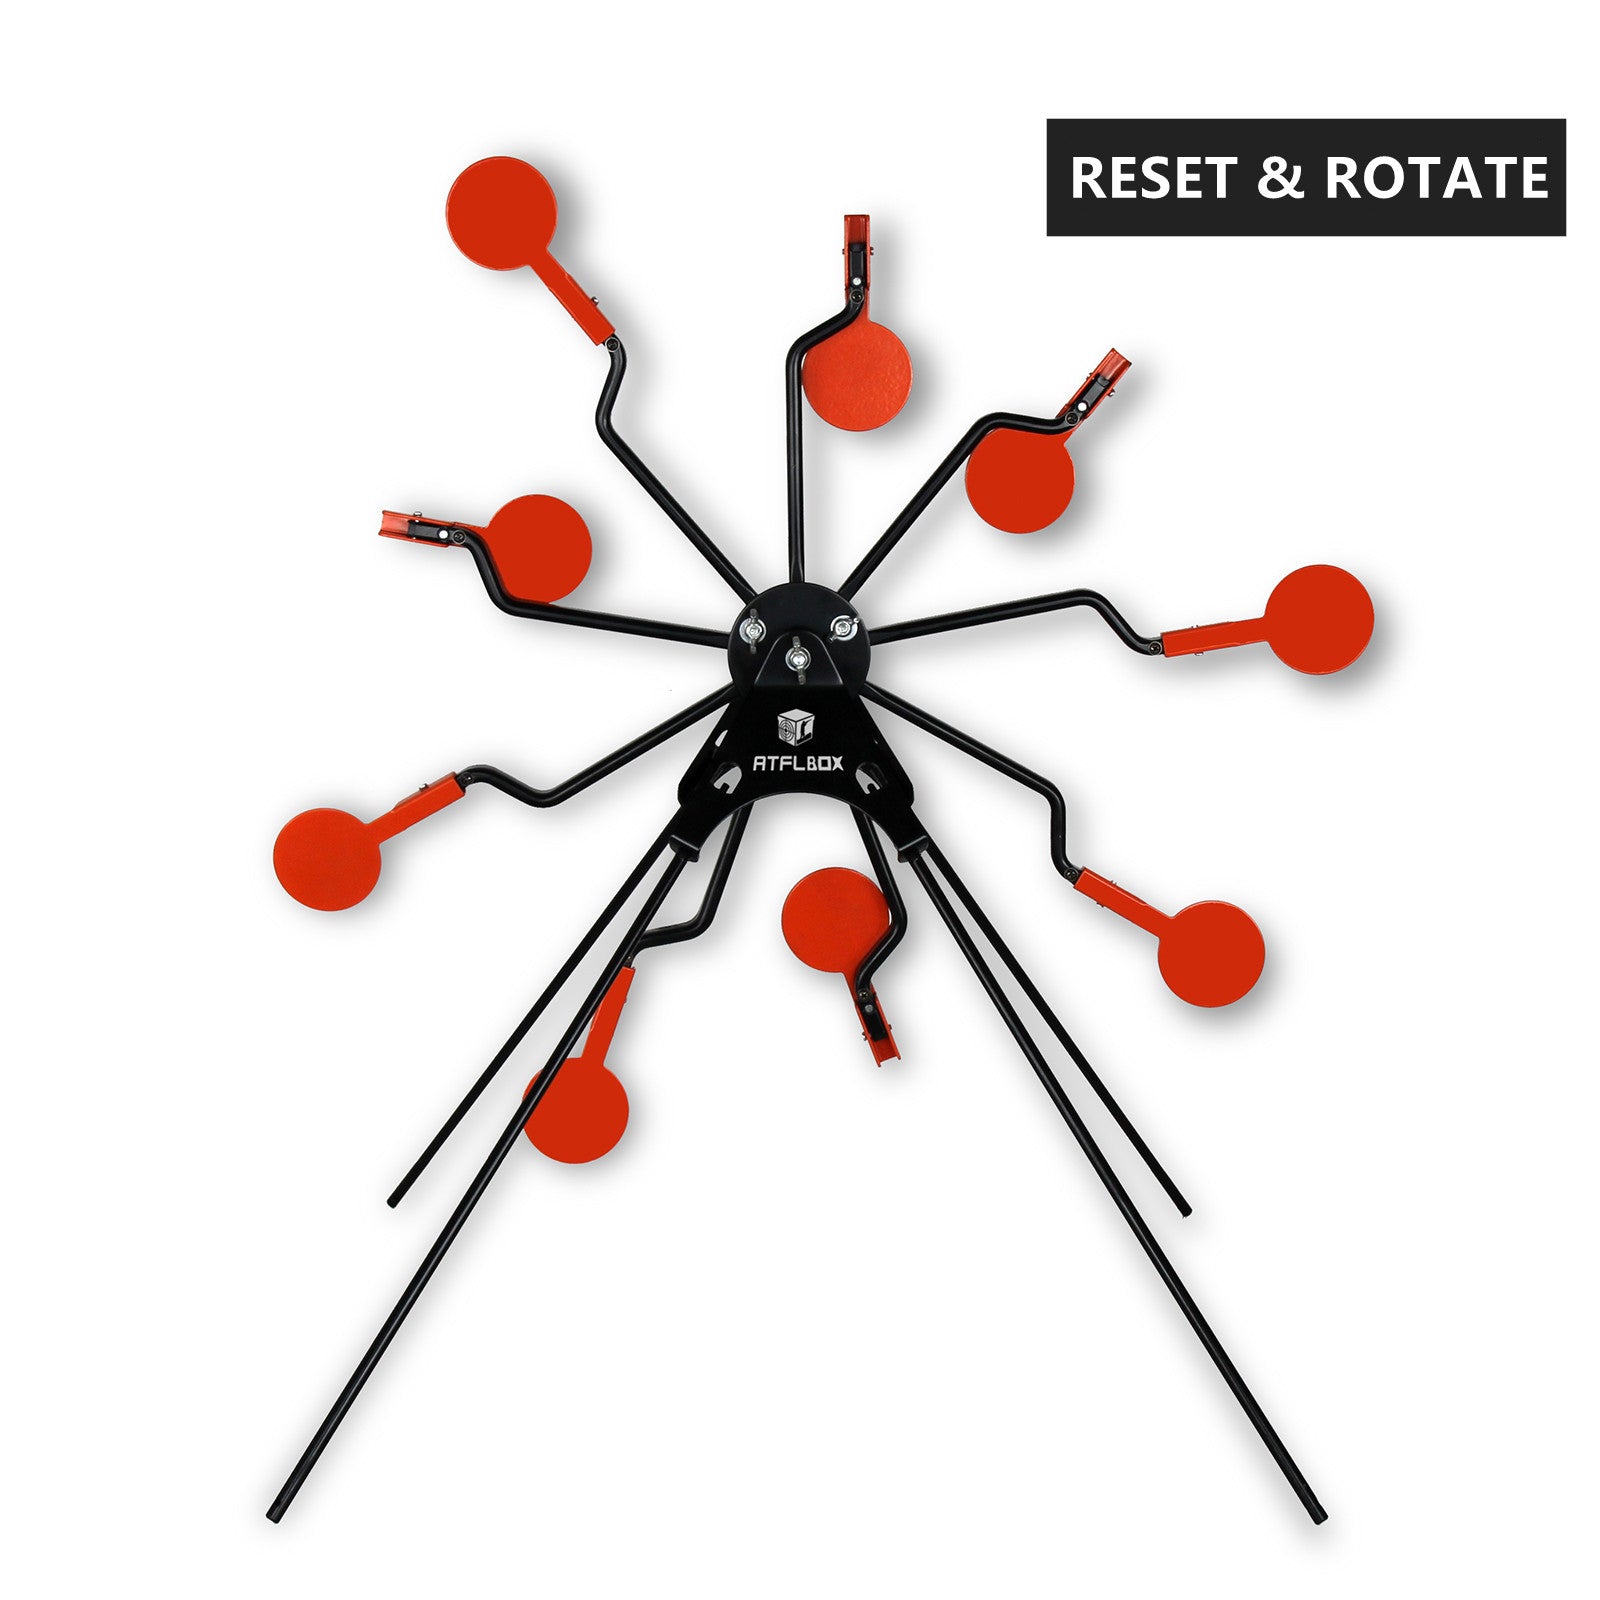  GearOZ Spinning Airsoft Target, 18x9, Pellet Gun Targets,  Air Rifle Targets, Tic-Tac-Toe Designed BB Gun Resetting Shooting Target  Stand for Outdoor, Backyard : Sports & Outdoors